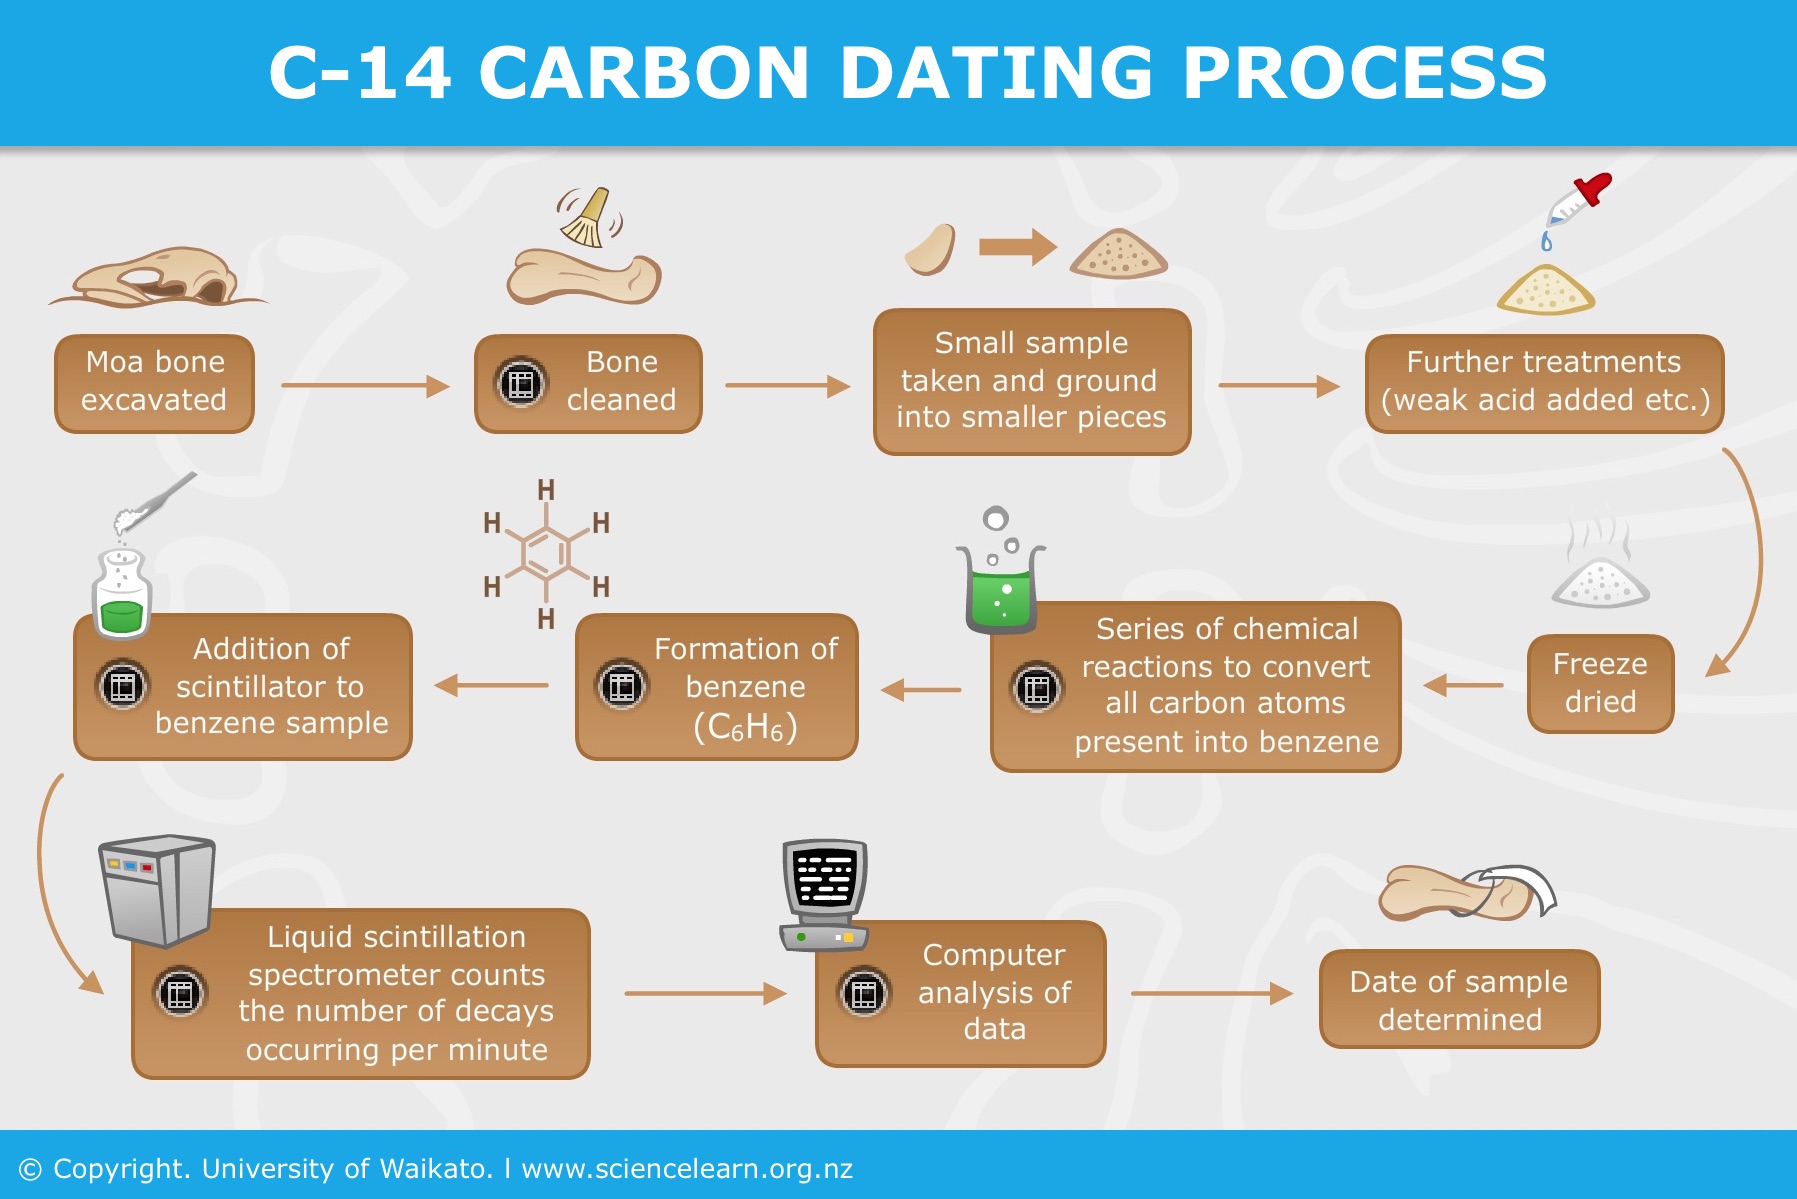 Carbon dating